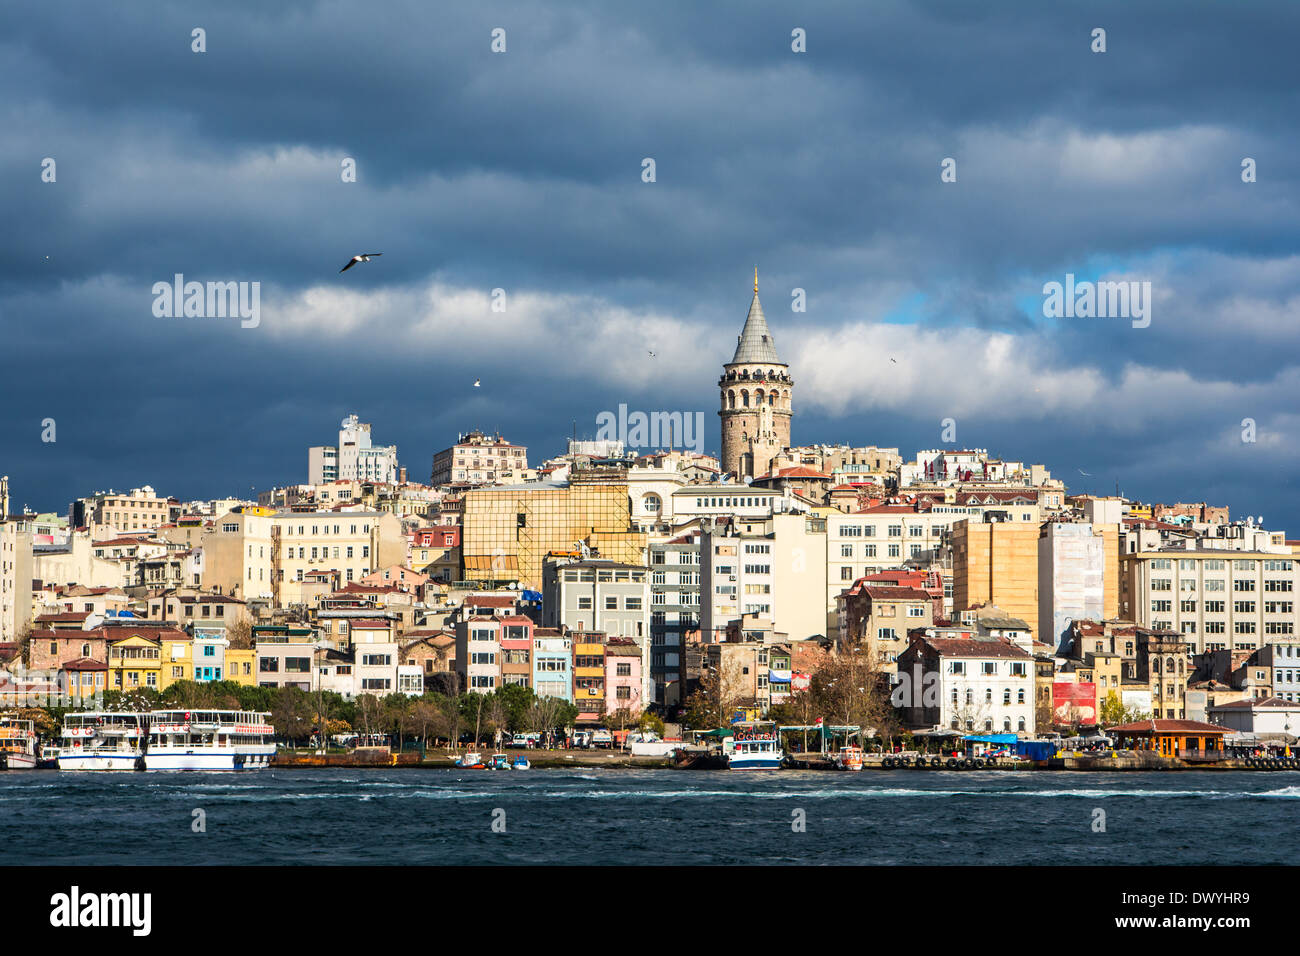 Galata Tower seen from the other side of the river in Istanbul Turkey. Stock Photo